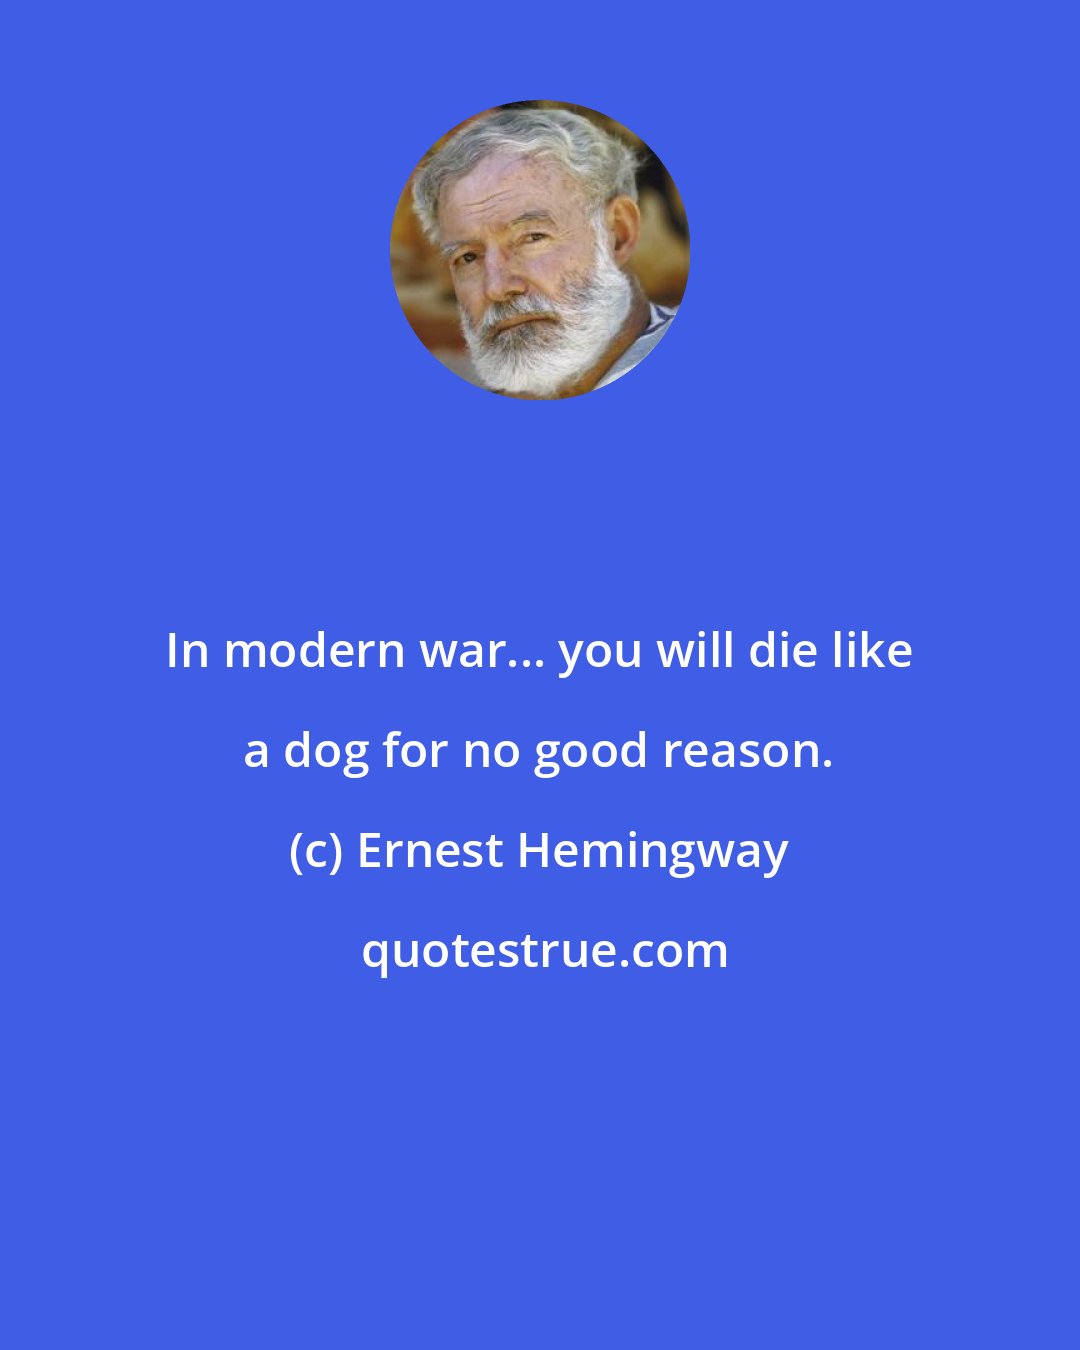 Ernest Hemingway: In modern war... you will die like a dog for no good reason.